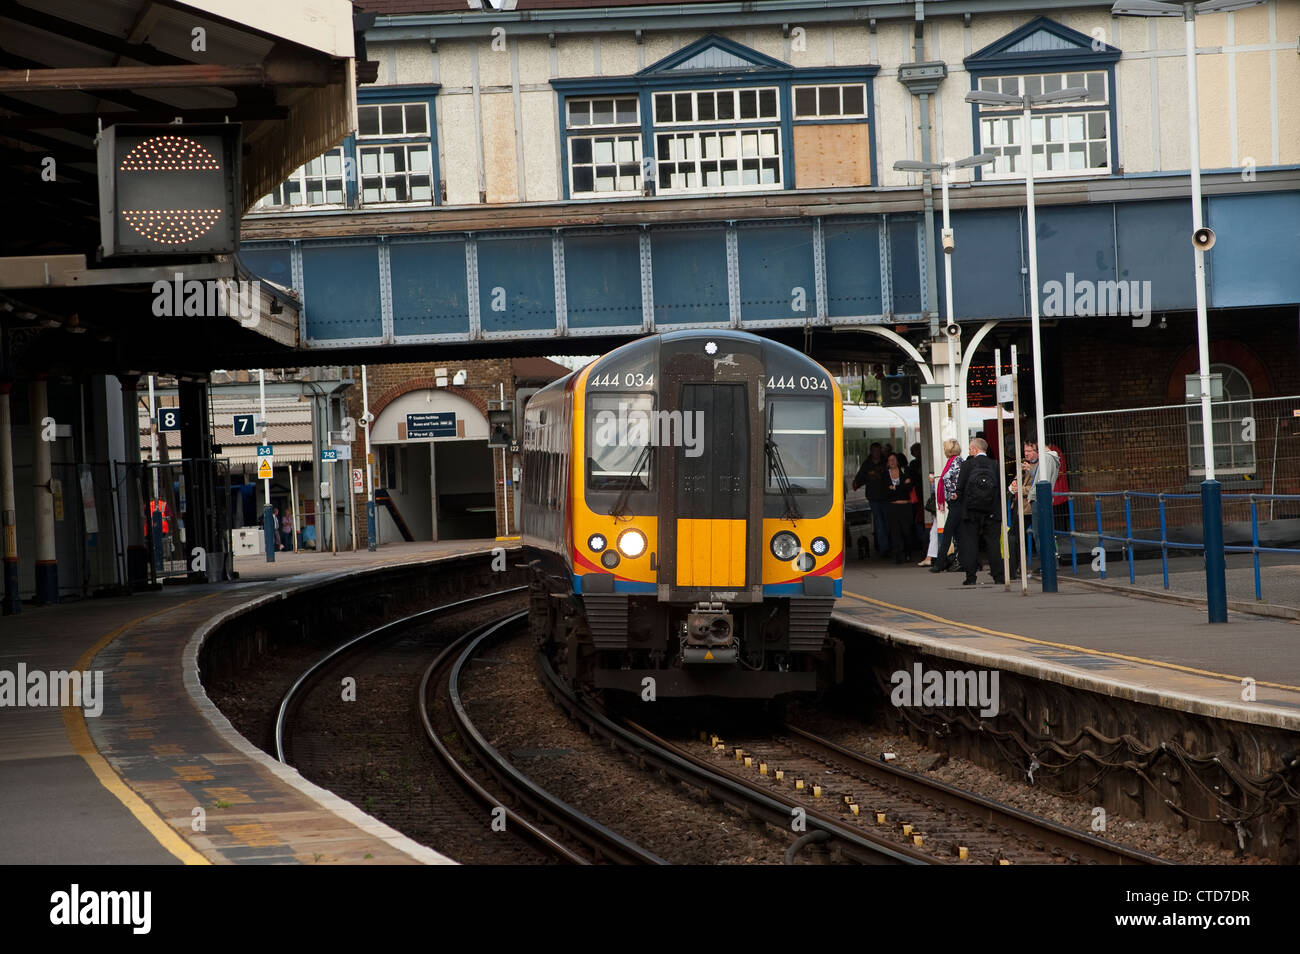 Class 444 passenger train in South West Trains livery at Clapham Junction station, England. Stock Photo